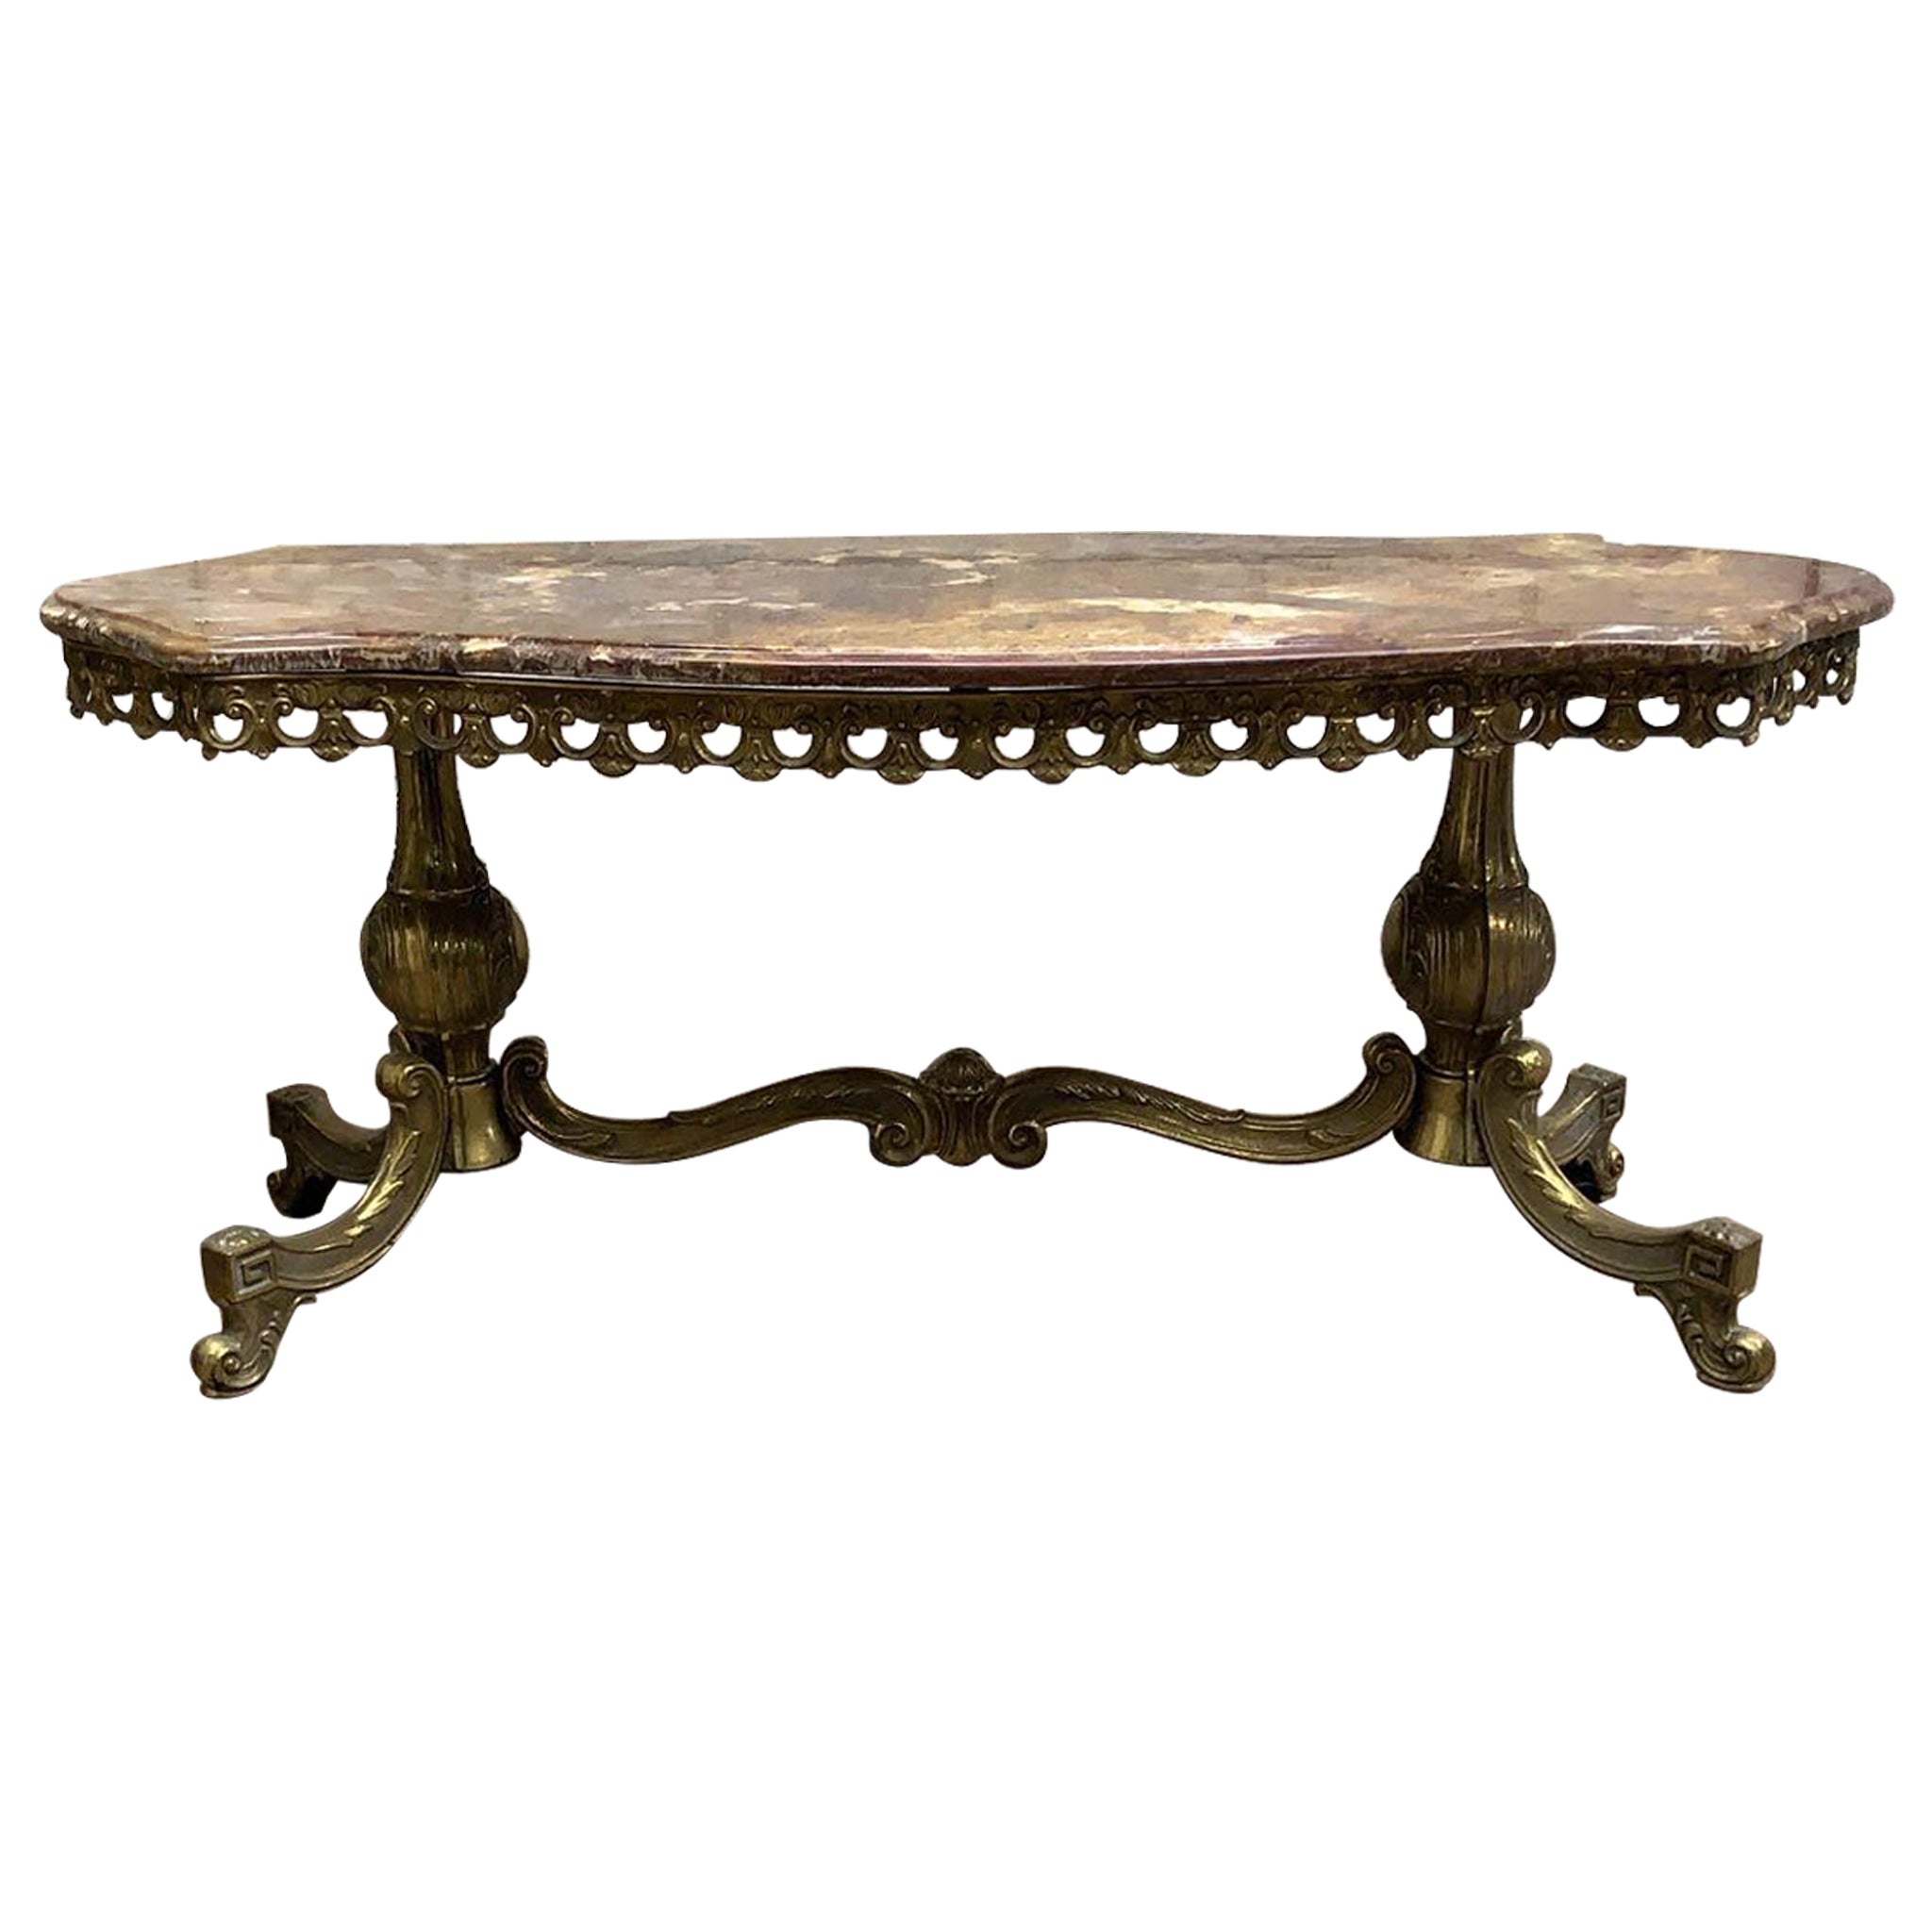 Antique Italian Gilt-Bronze Base Onyx Top Coffee/Cocktail Table For Sale